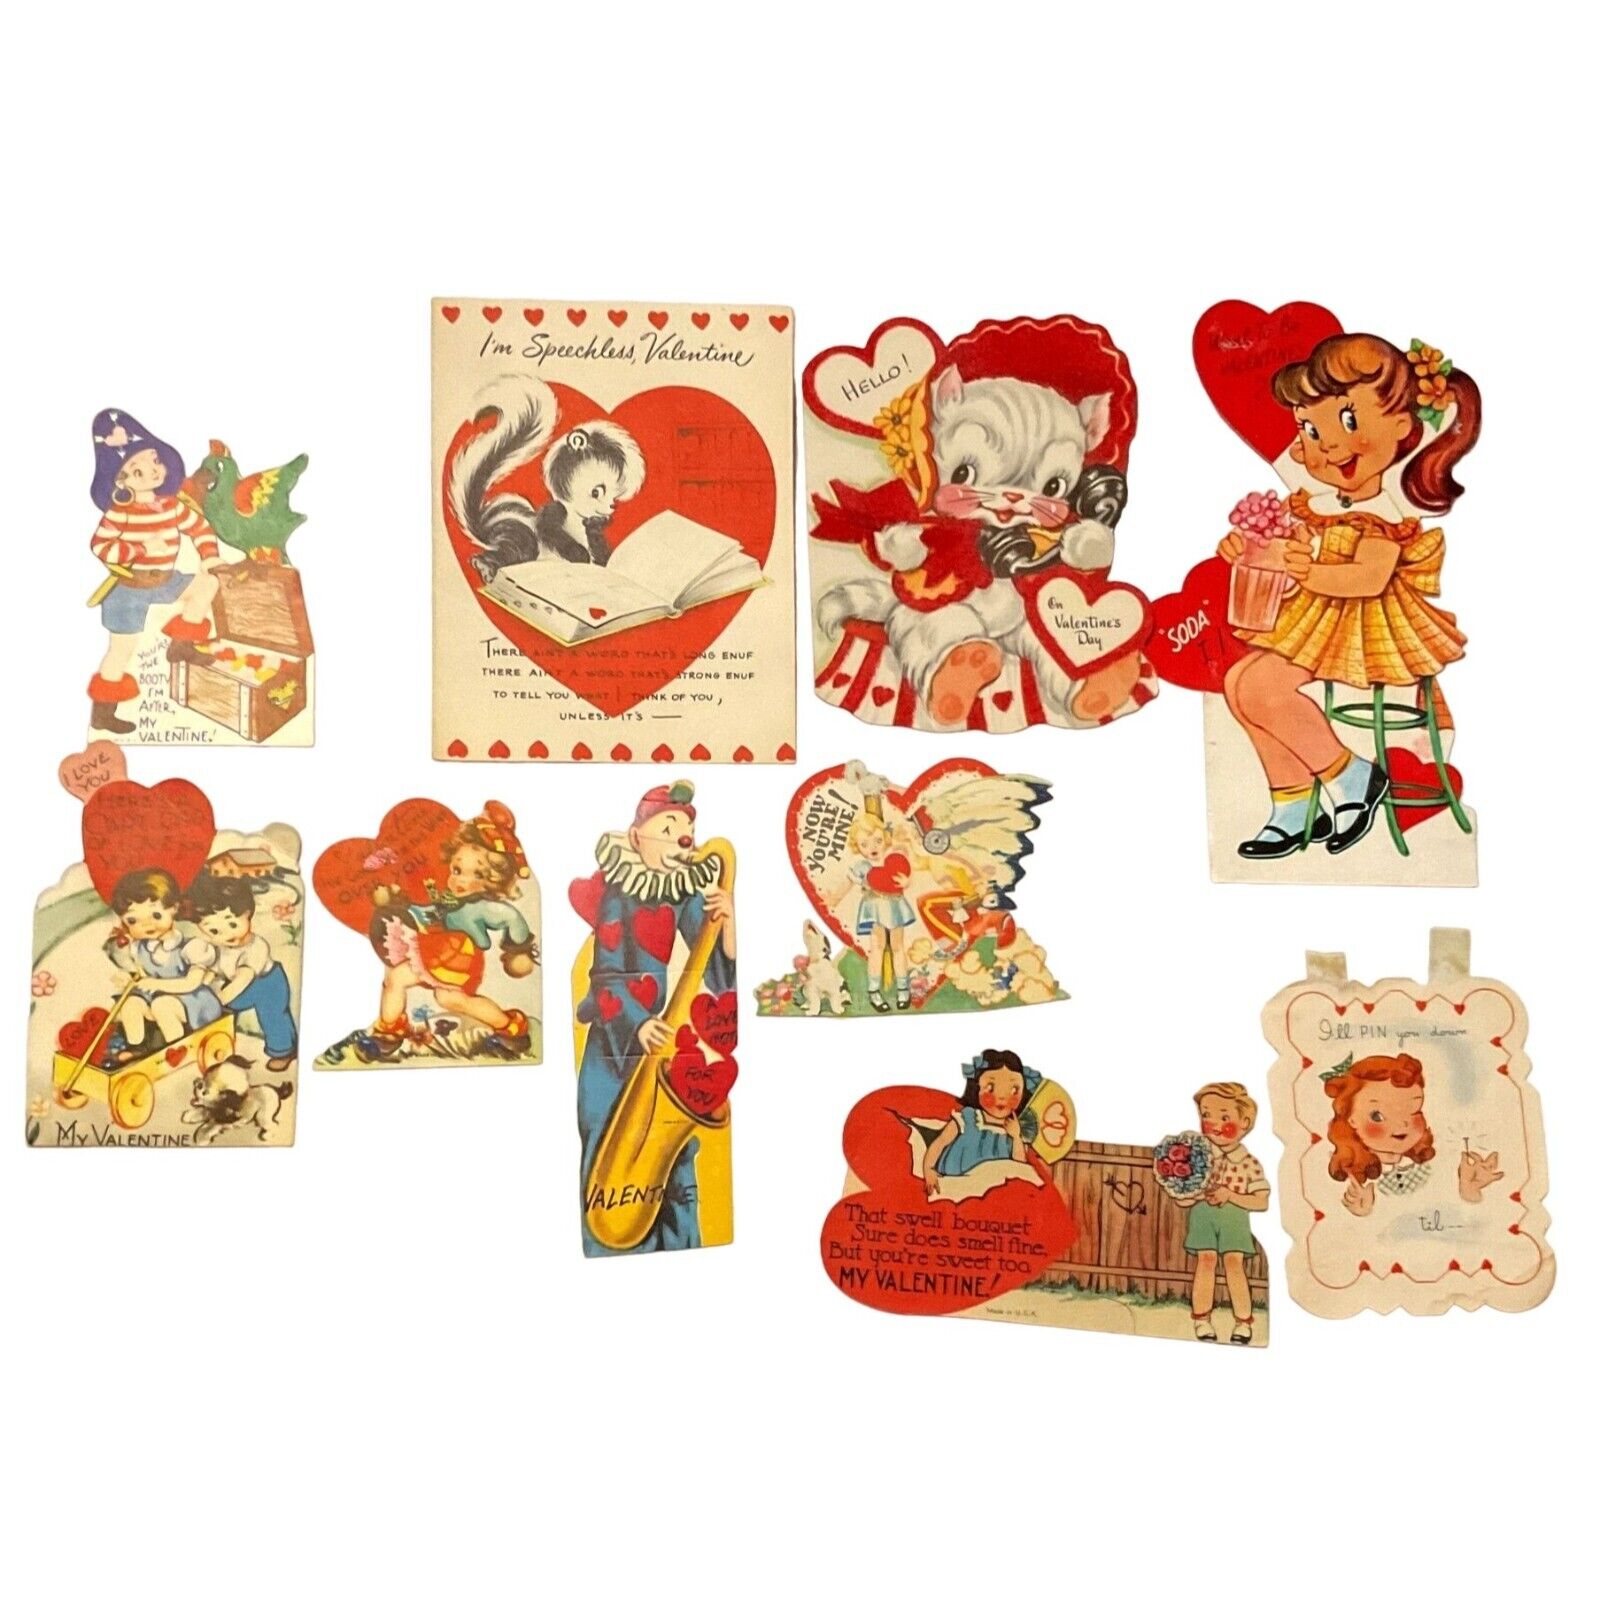 VTG 40s VALENTINE\'S DAY CARDS CARTOON THEMED USED 10 CARDS MISC